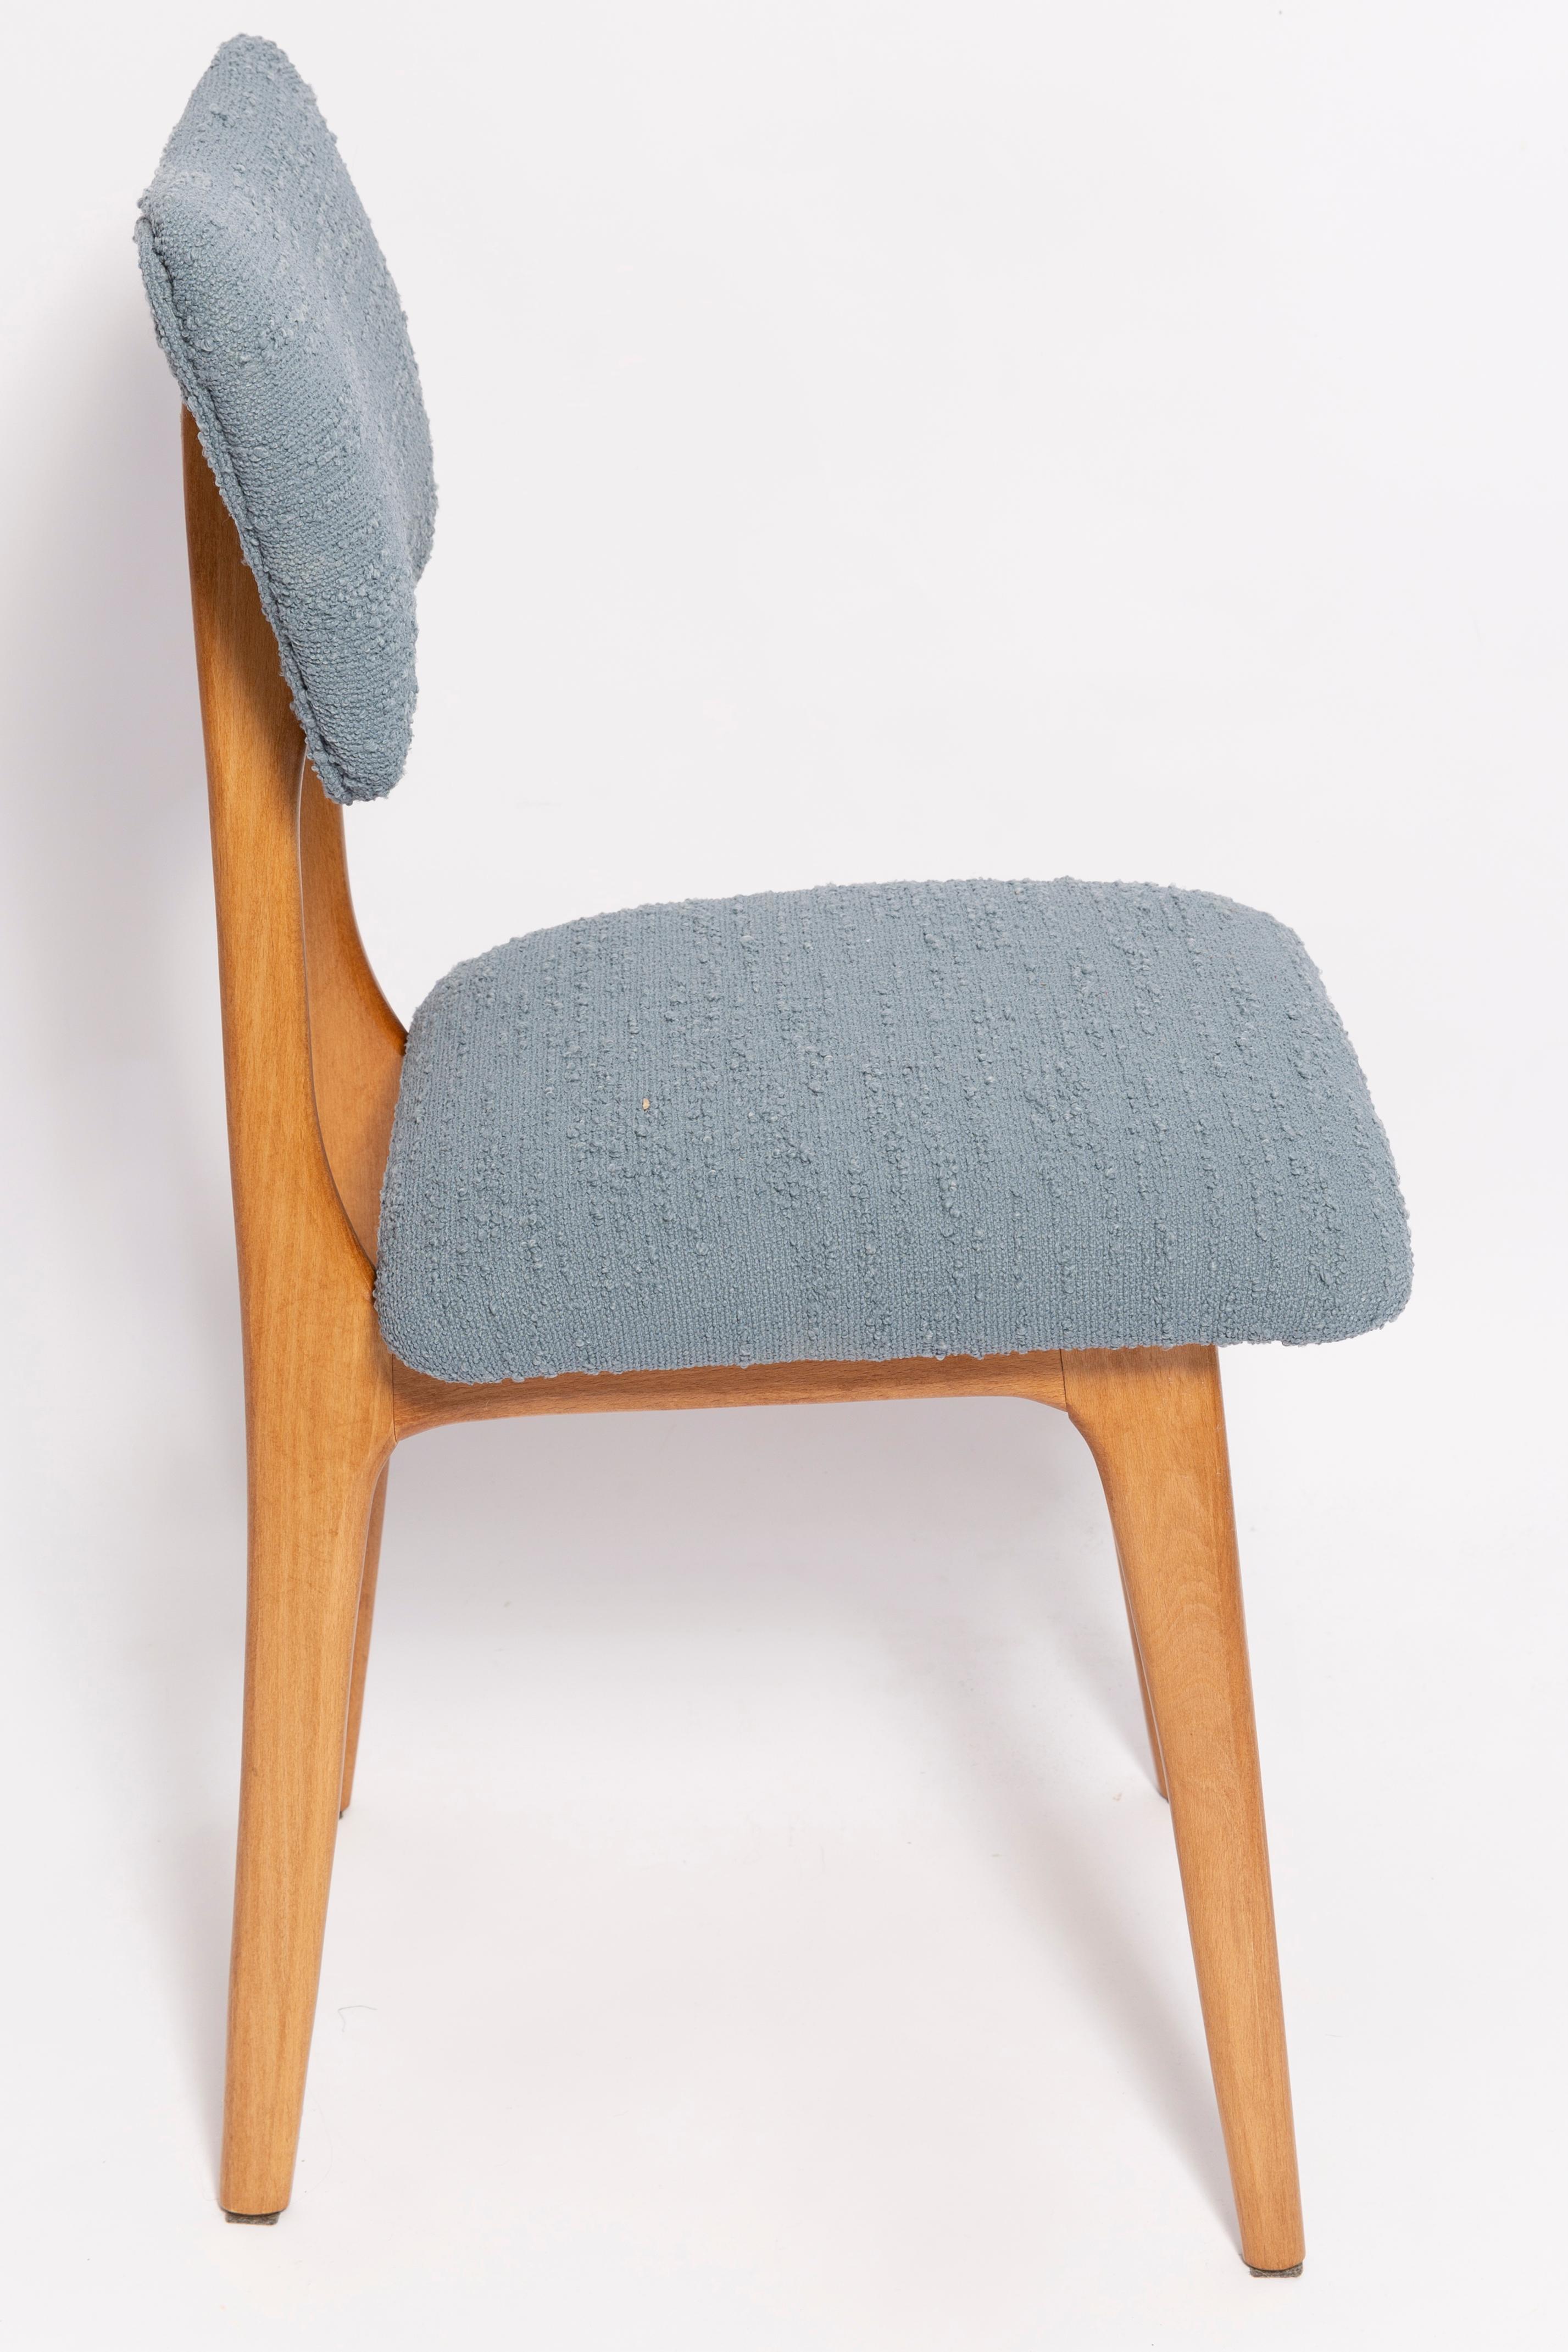 Hand-Crafted Mid Century Butterfly Dining Chair, Gray Boucle, Europe, 1960s For Sale